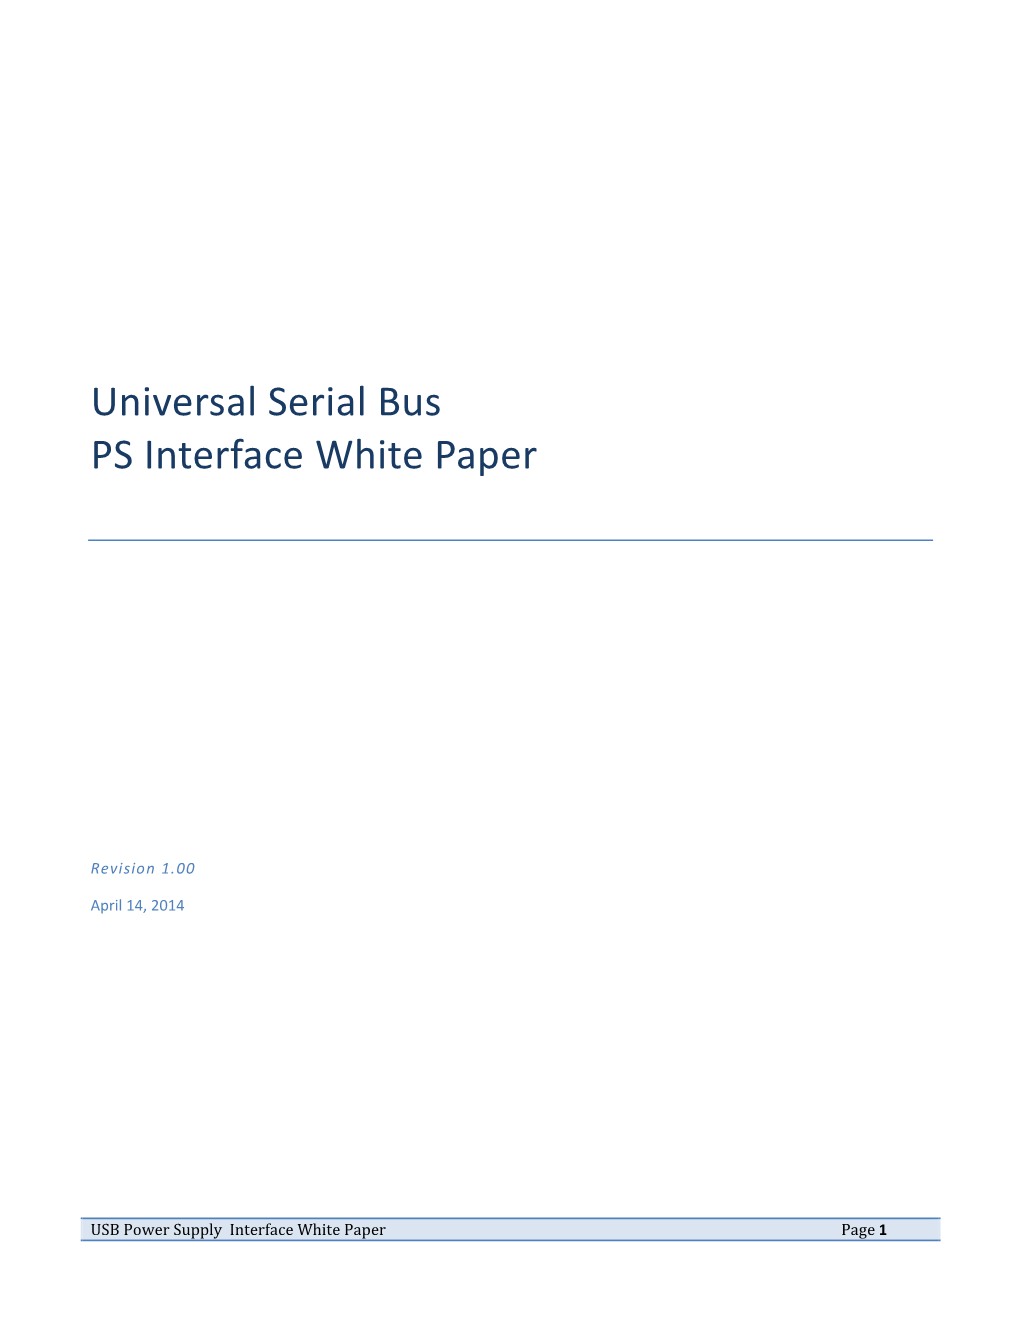 Universal Serial Bus PS Interface White Paper